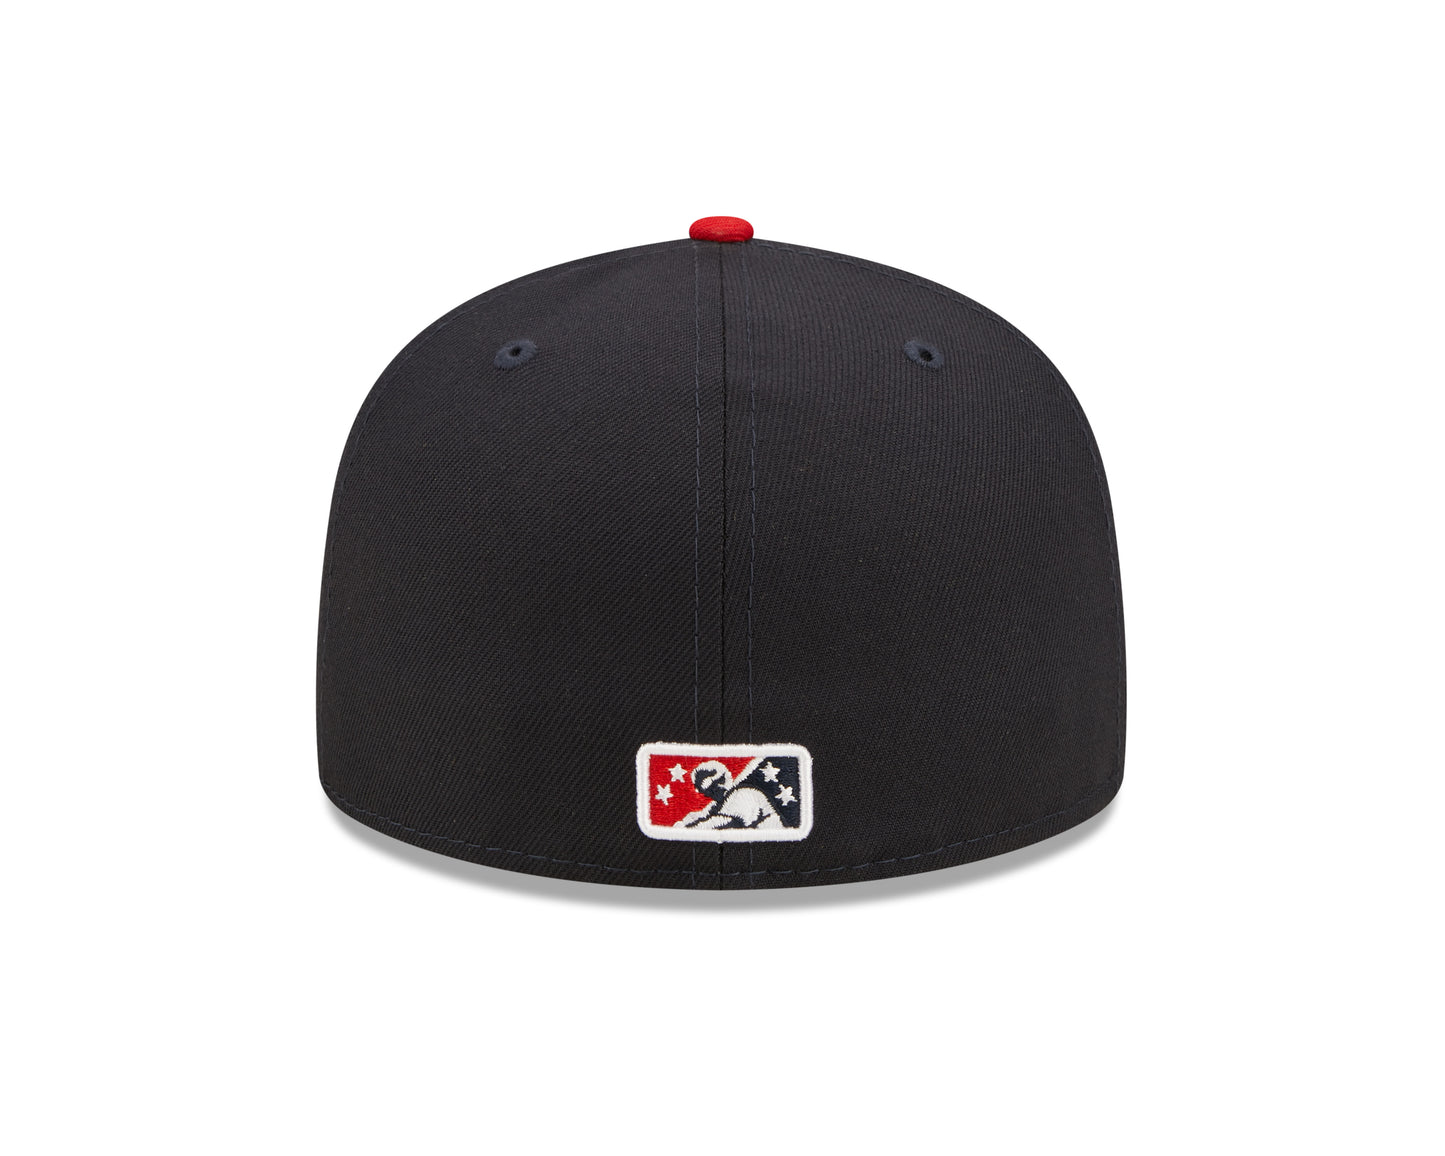 New Era - 59fifty Fitted - MiLB - AC Perf - Nashville Sounds - Navy/Red - Headz Up 